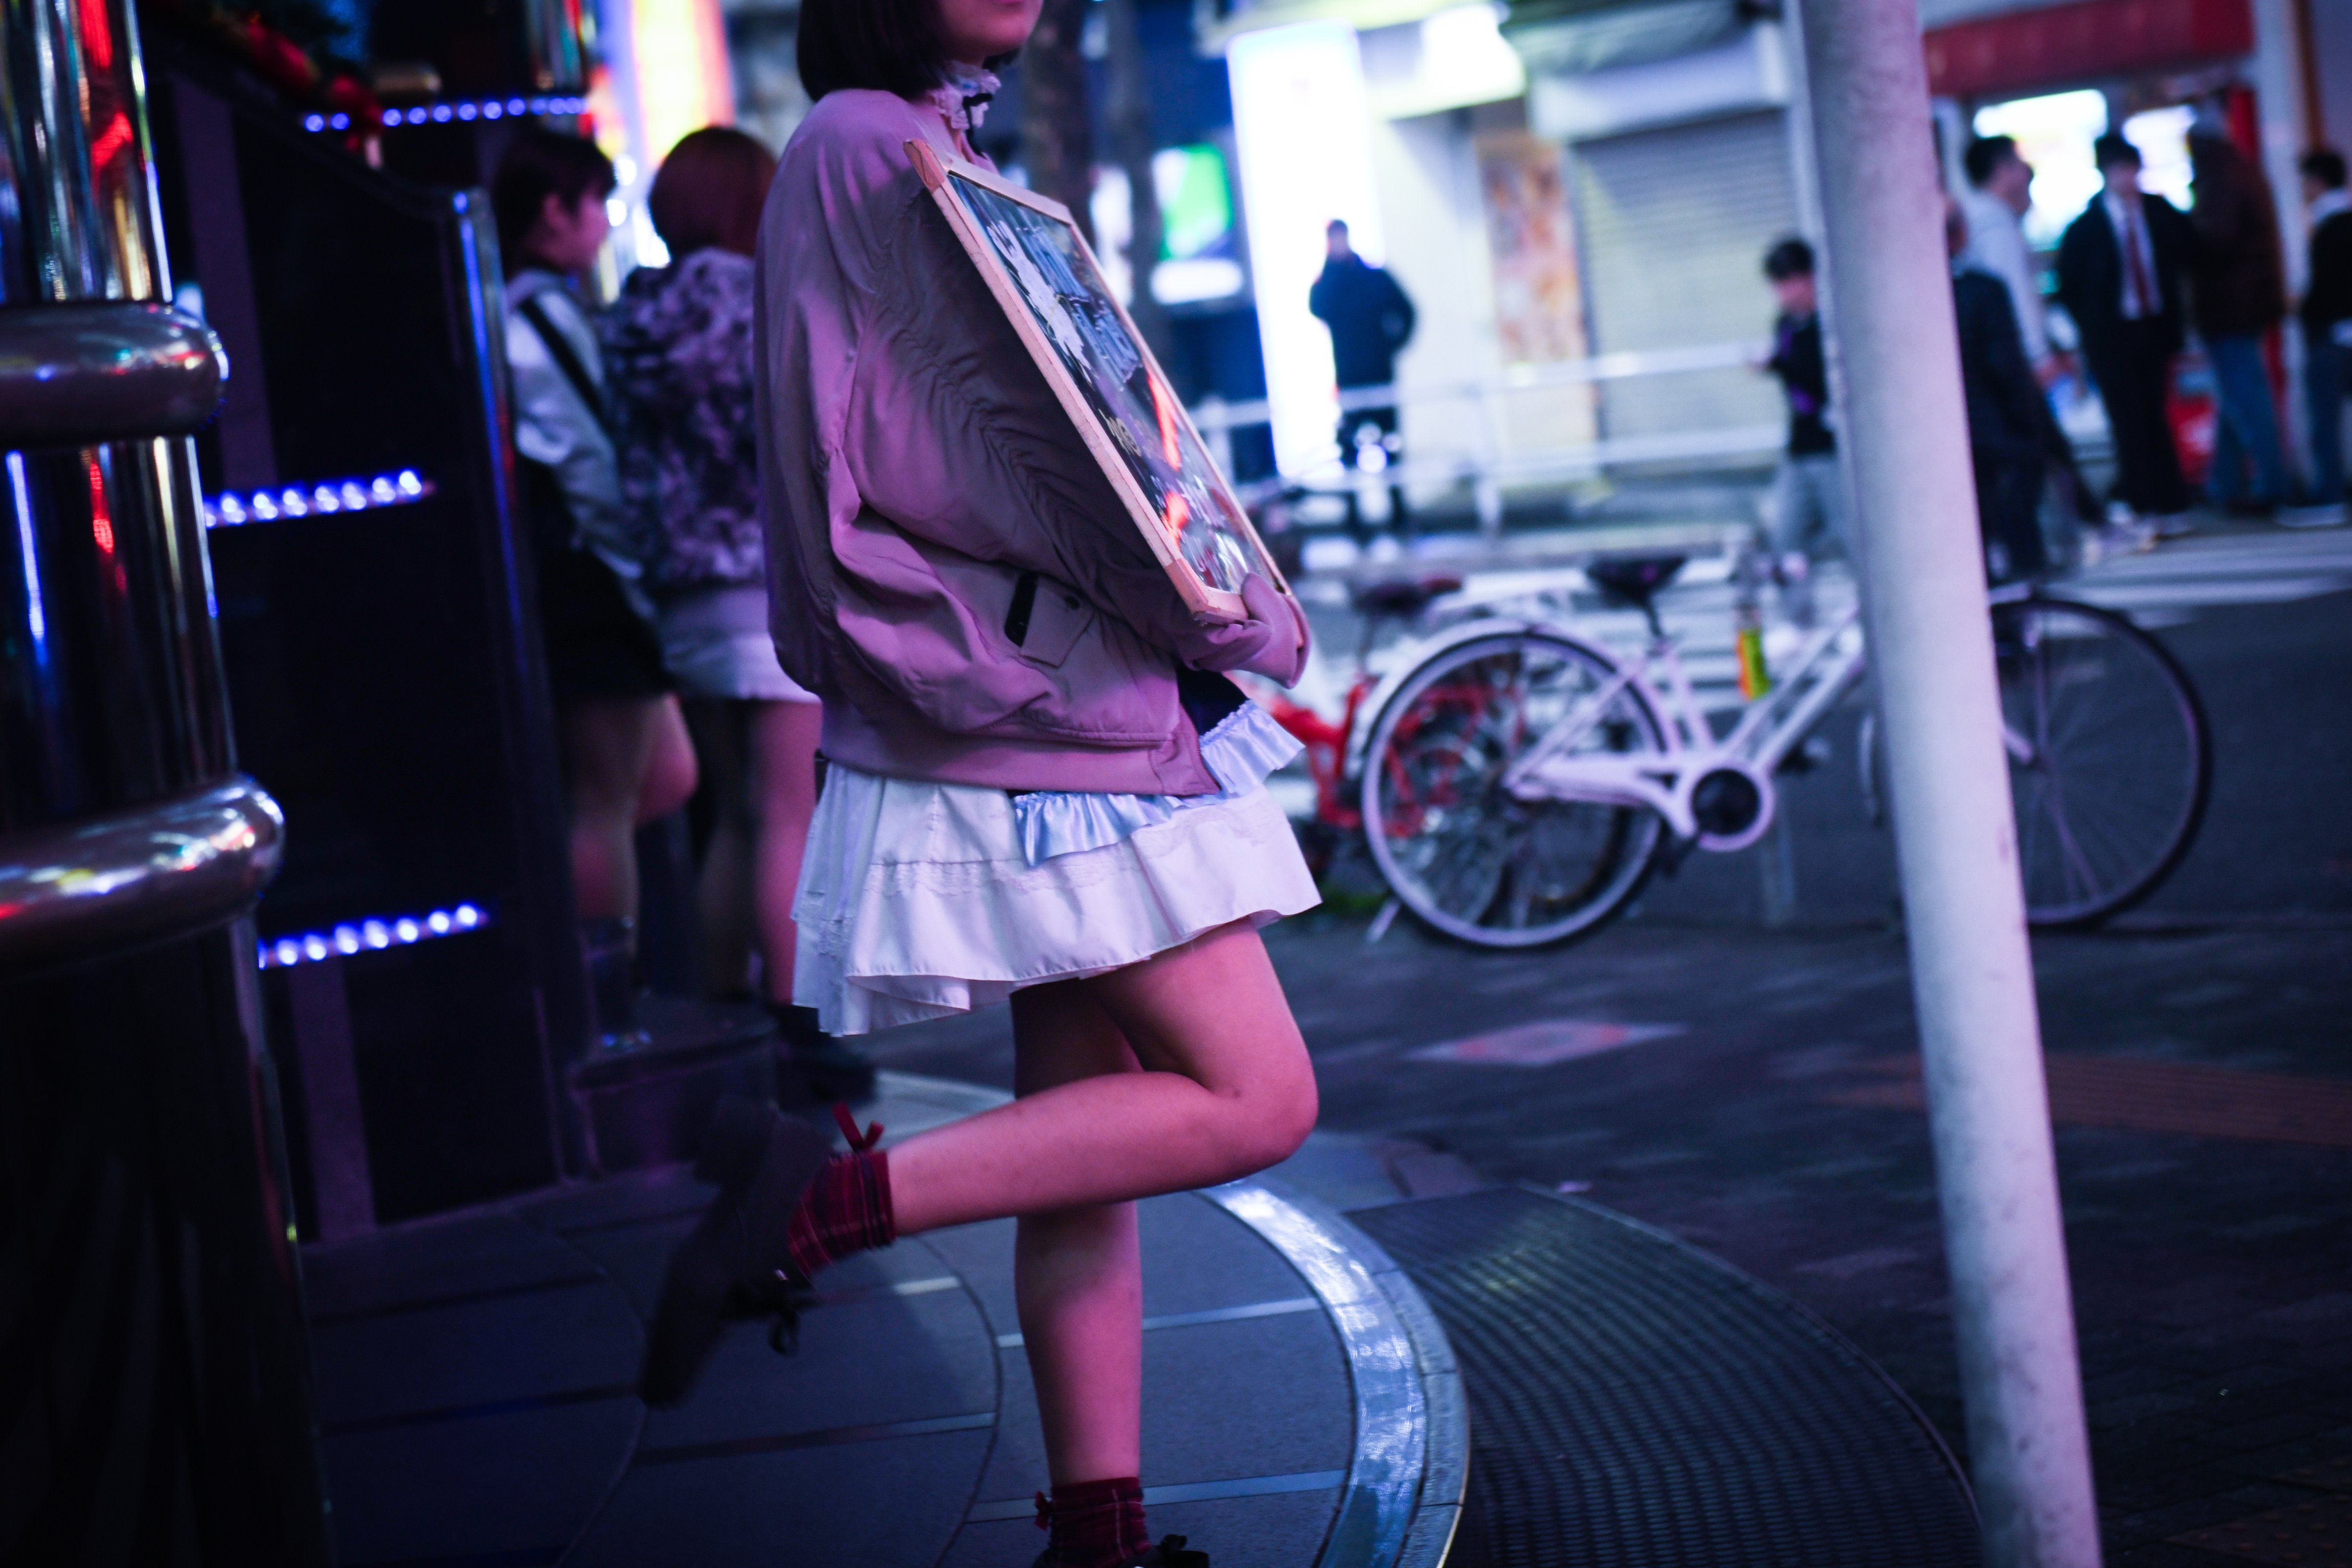 Night Views of Kabukicho As Dealmaking in Escort Bars Thrives in Pockets of Asia